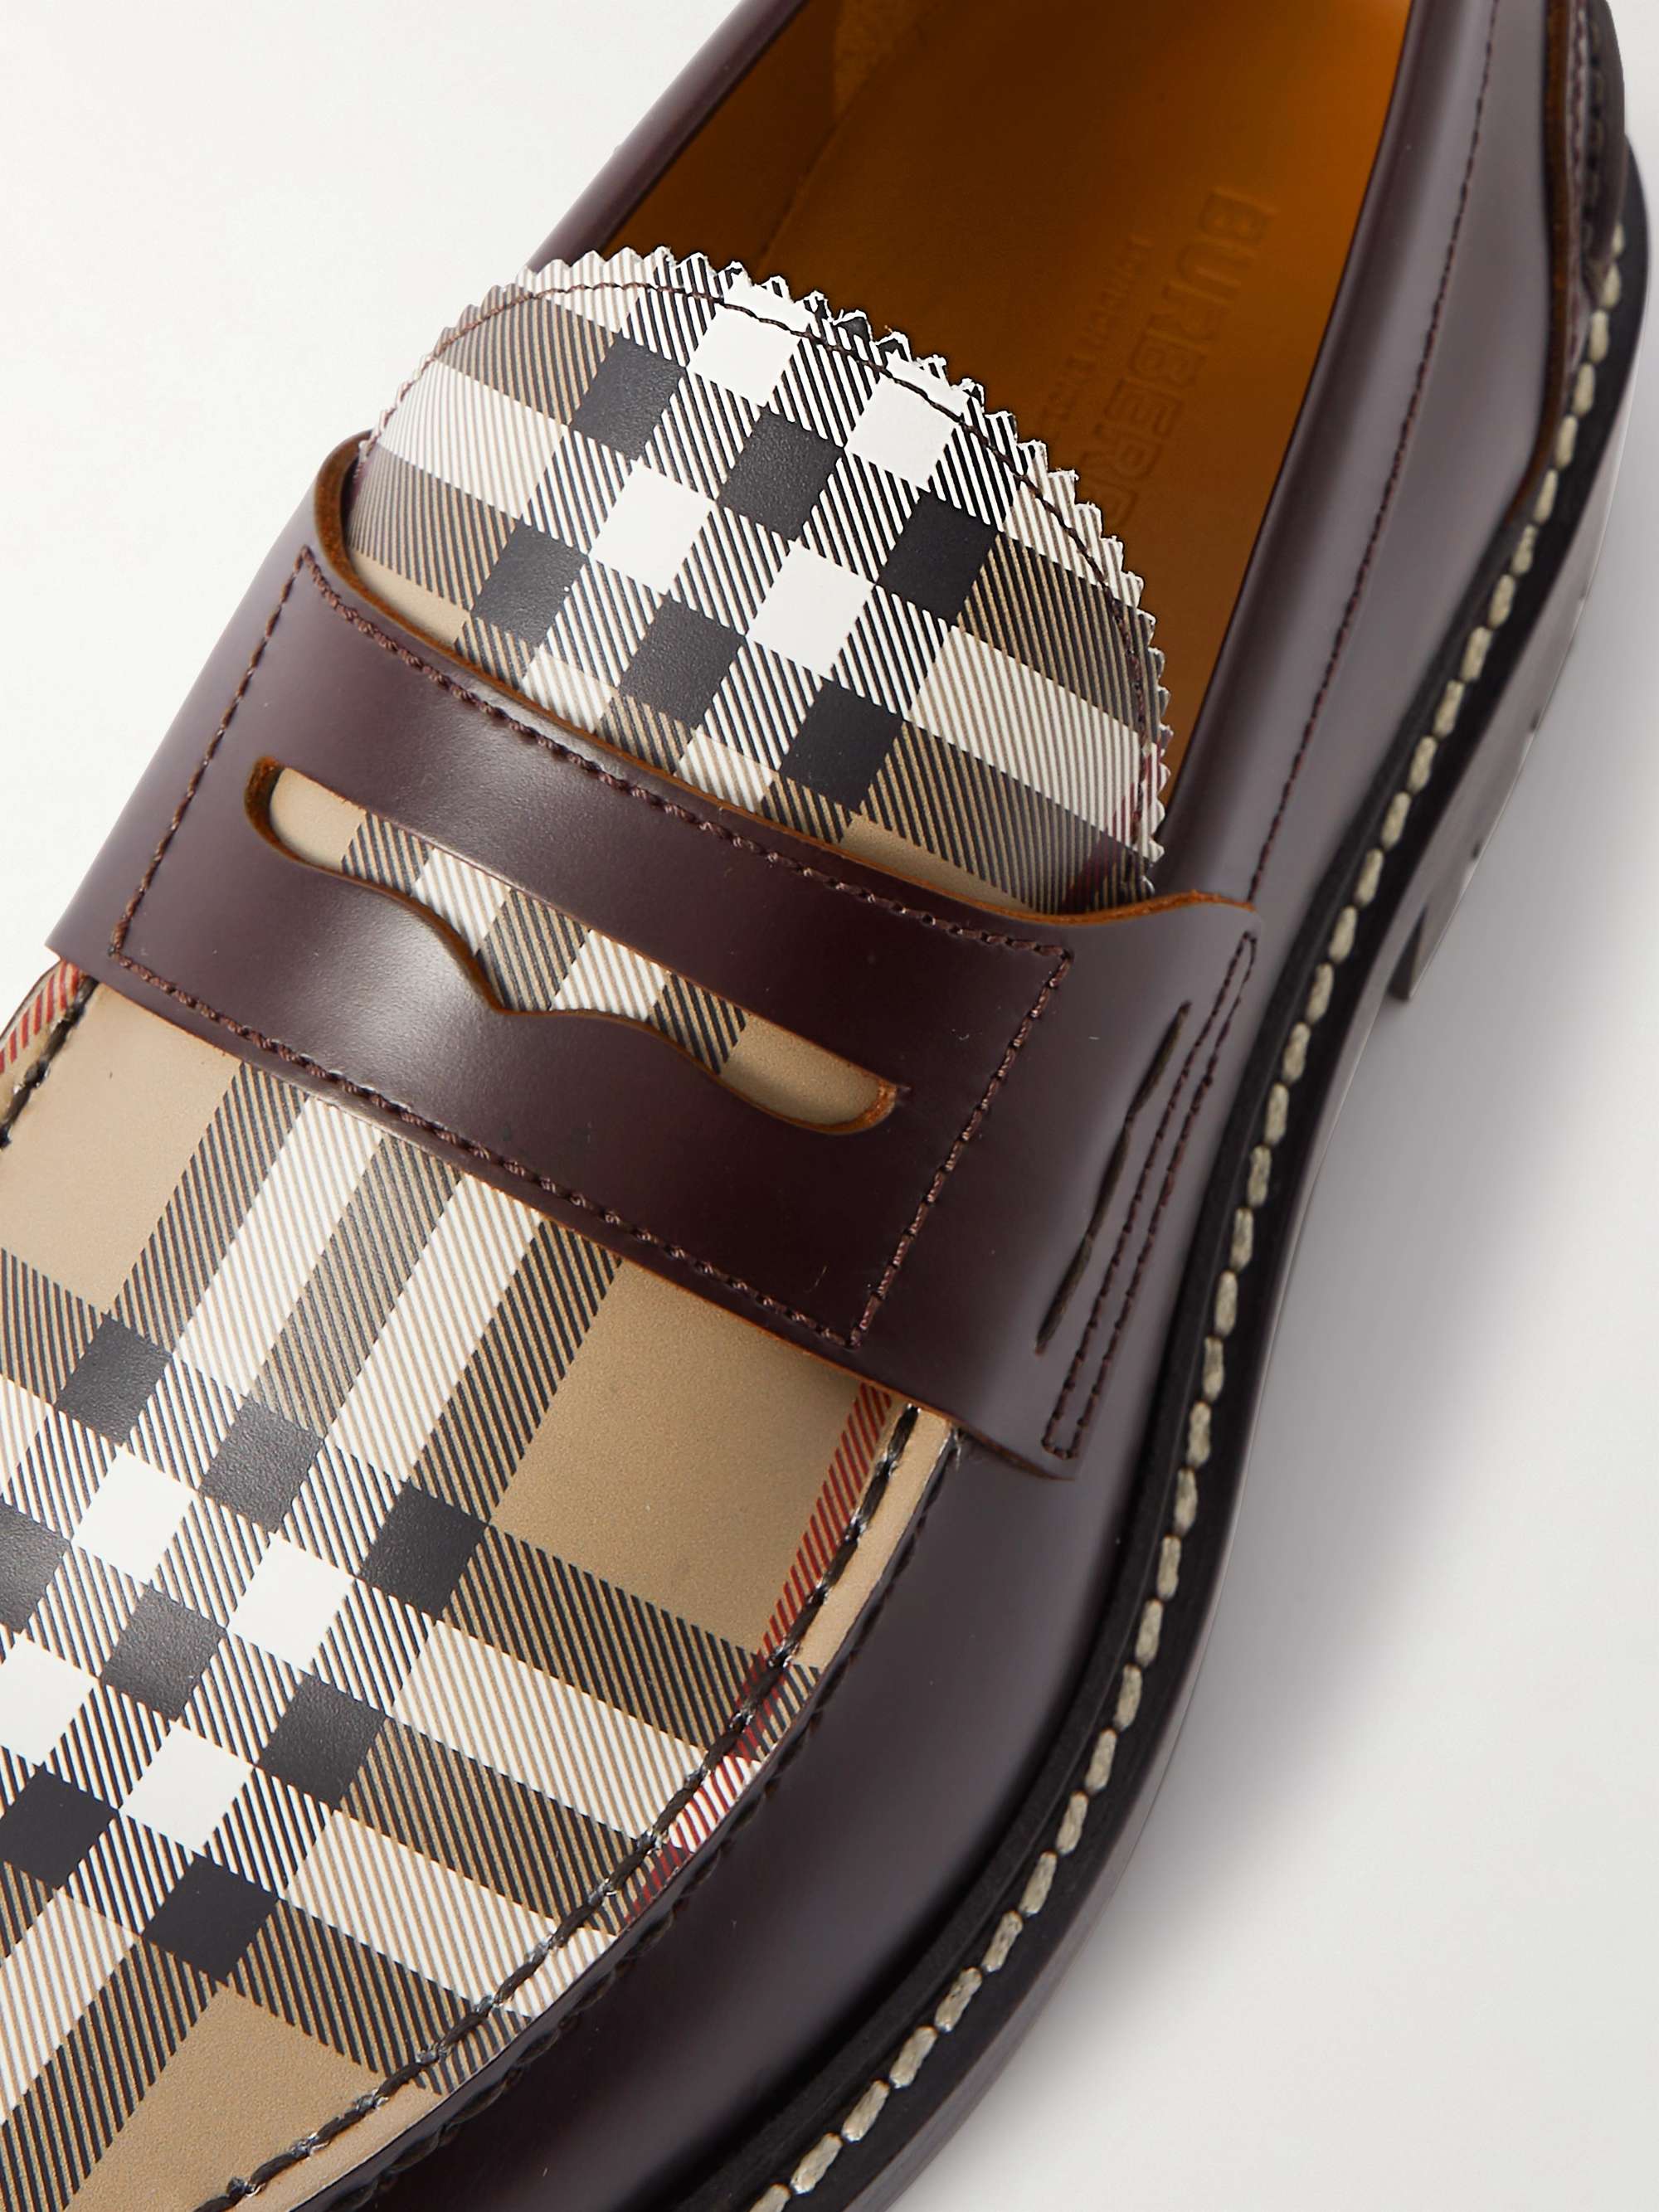 BURBERRY Checked Leather Penny Loafers